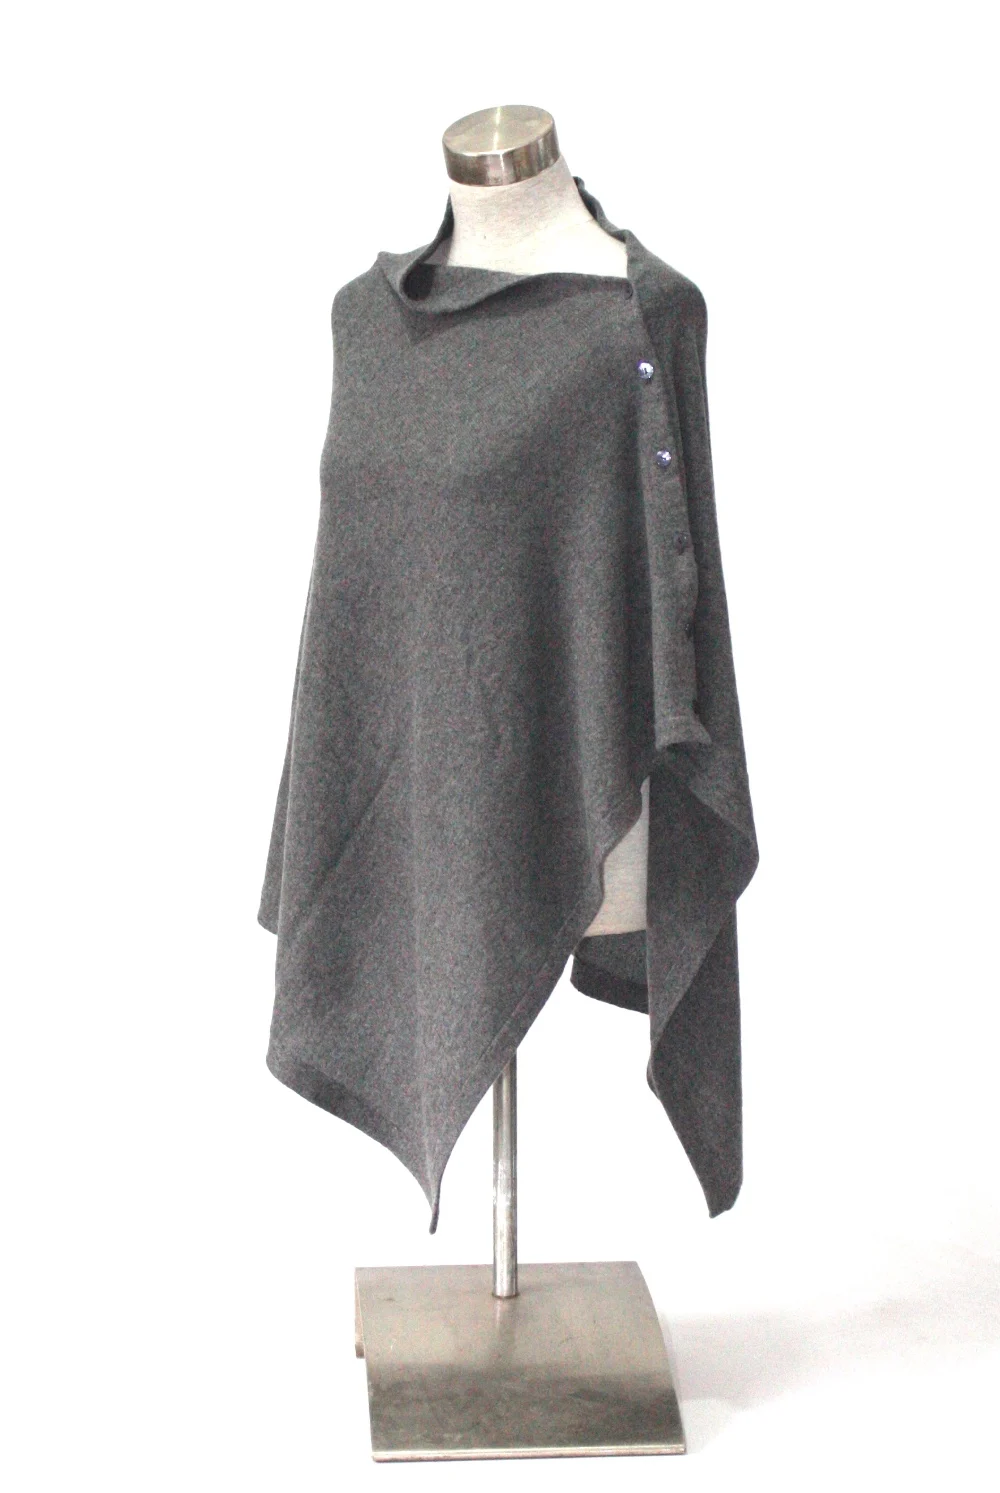 Nepal Made Flat Knitted Button Cashmere Poncho - Buy Cashmere Poncho ...